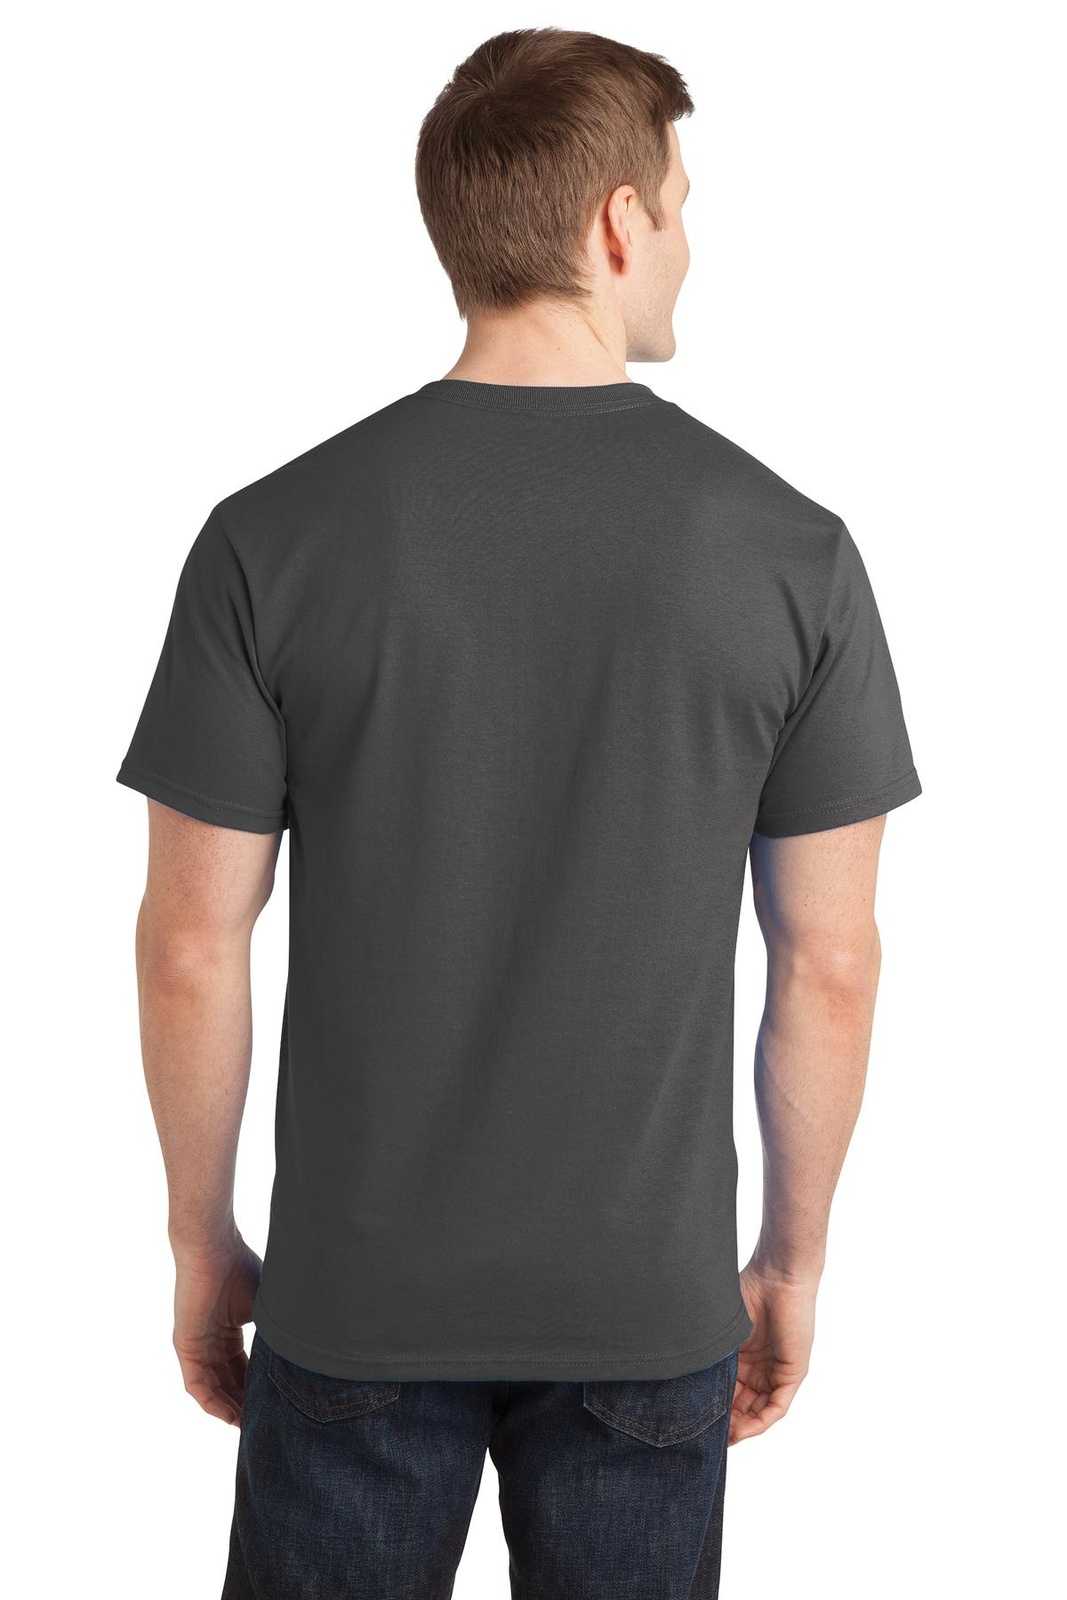 Port &amp; Company PC150 Ring Spun Cotton Tee - Charcoal - HIT a Double - 2